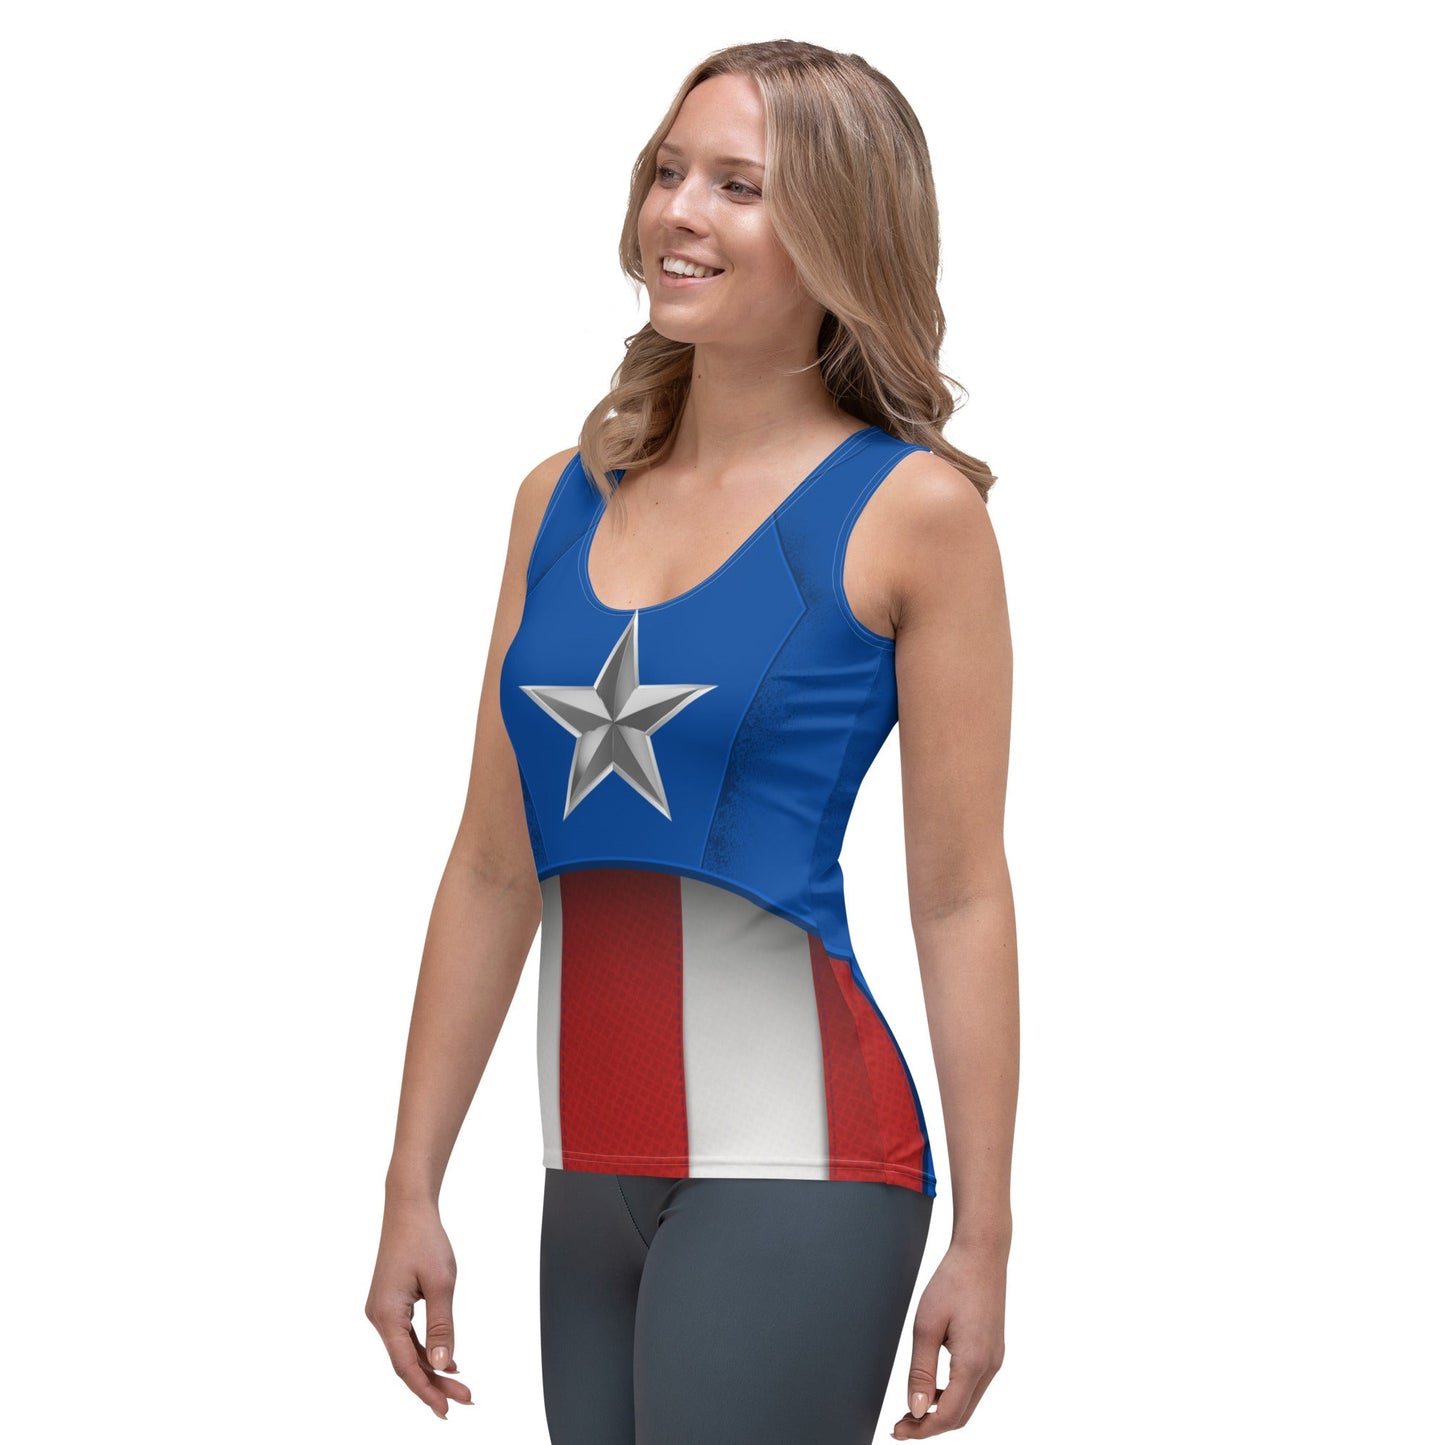 The Captain Tank Top active wearavengeravengers#tag4##tag5##tag6#